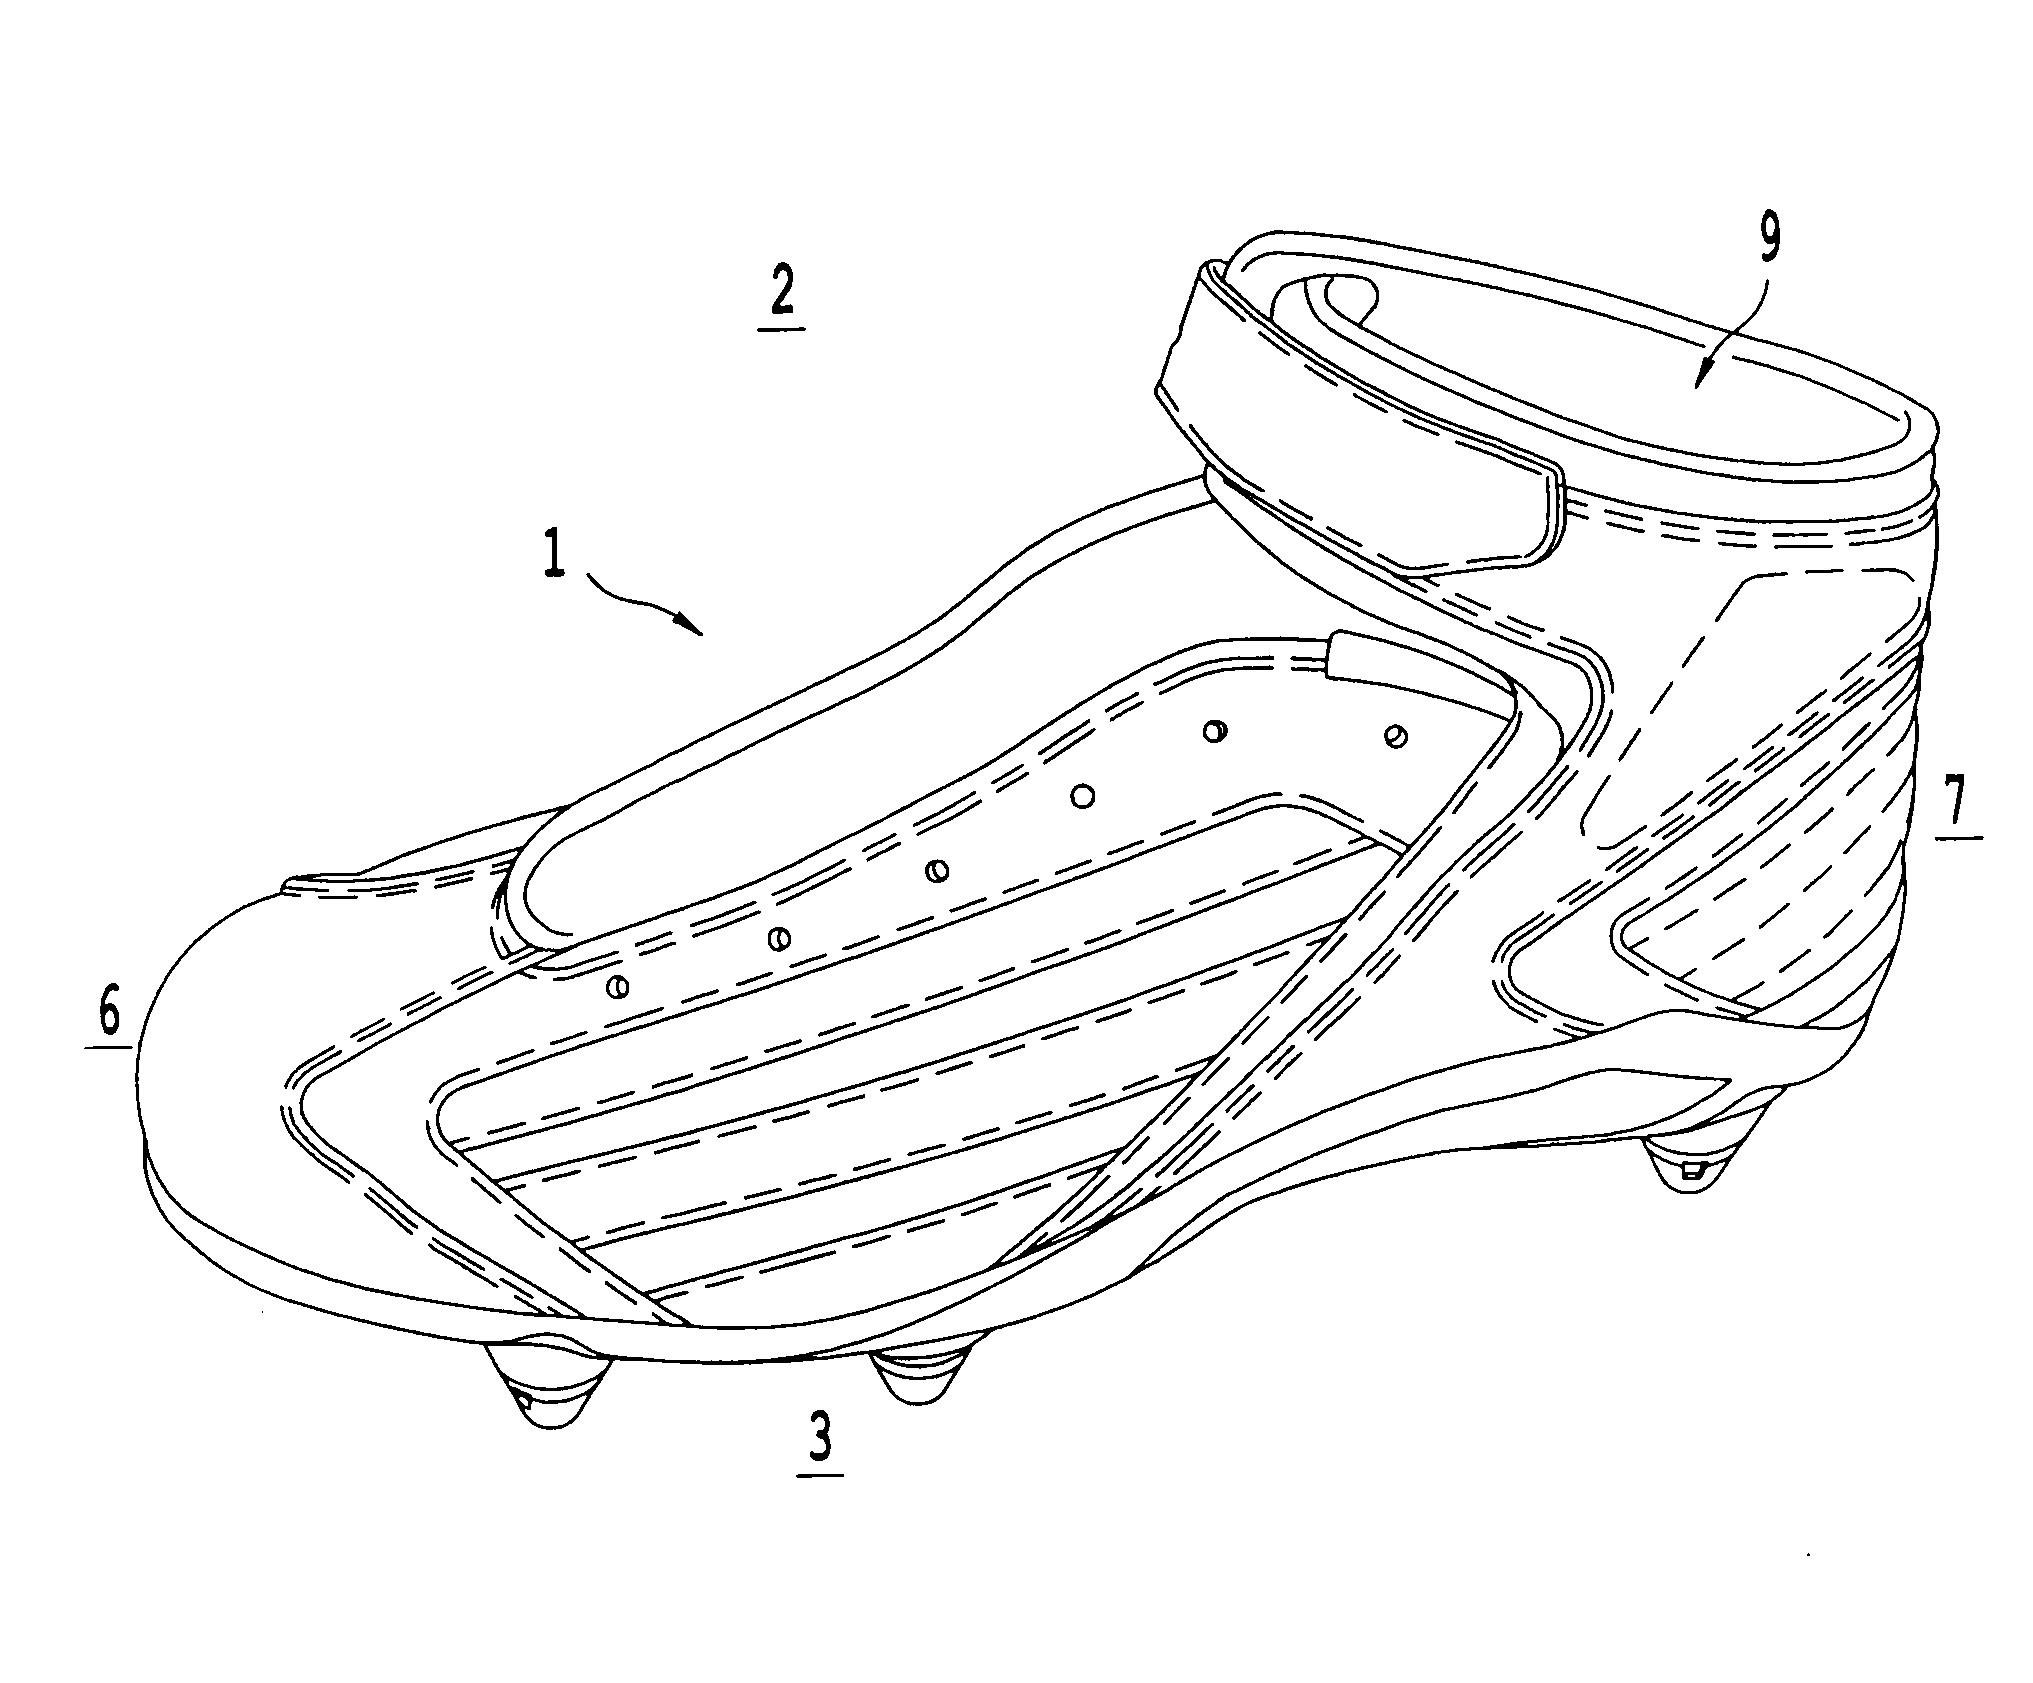 Cleated athletic shoe with cushion structures